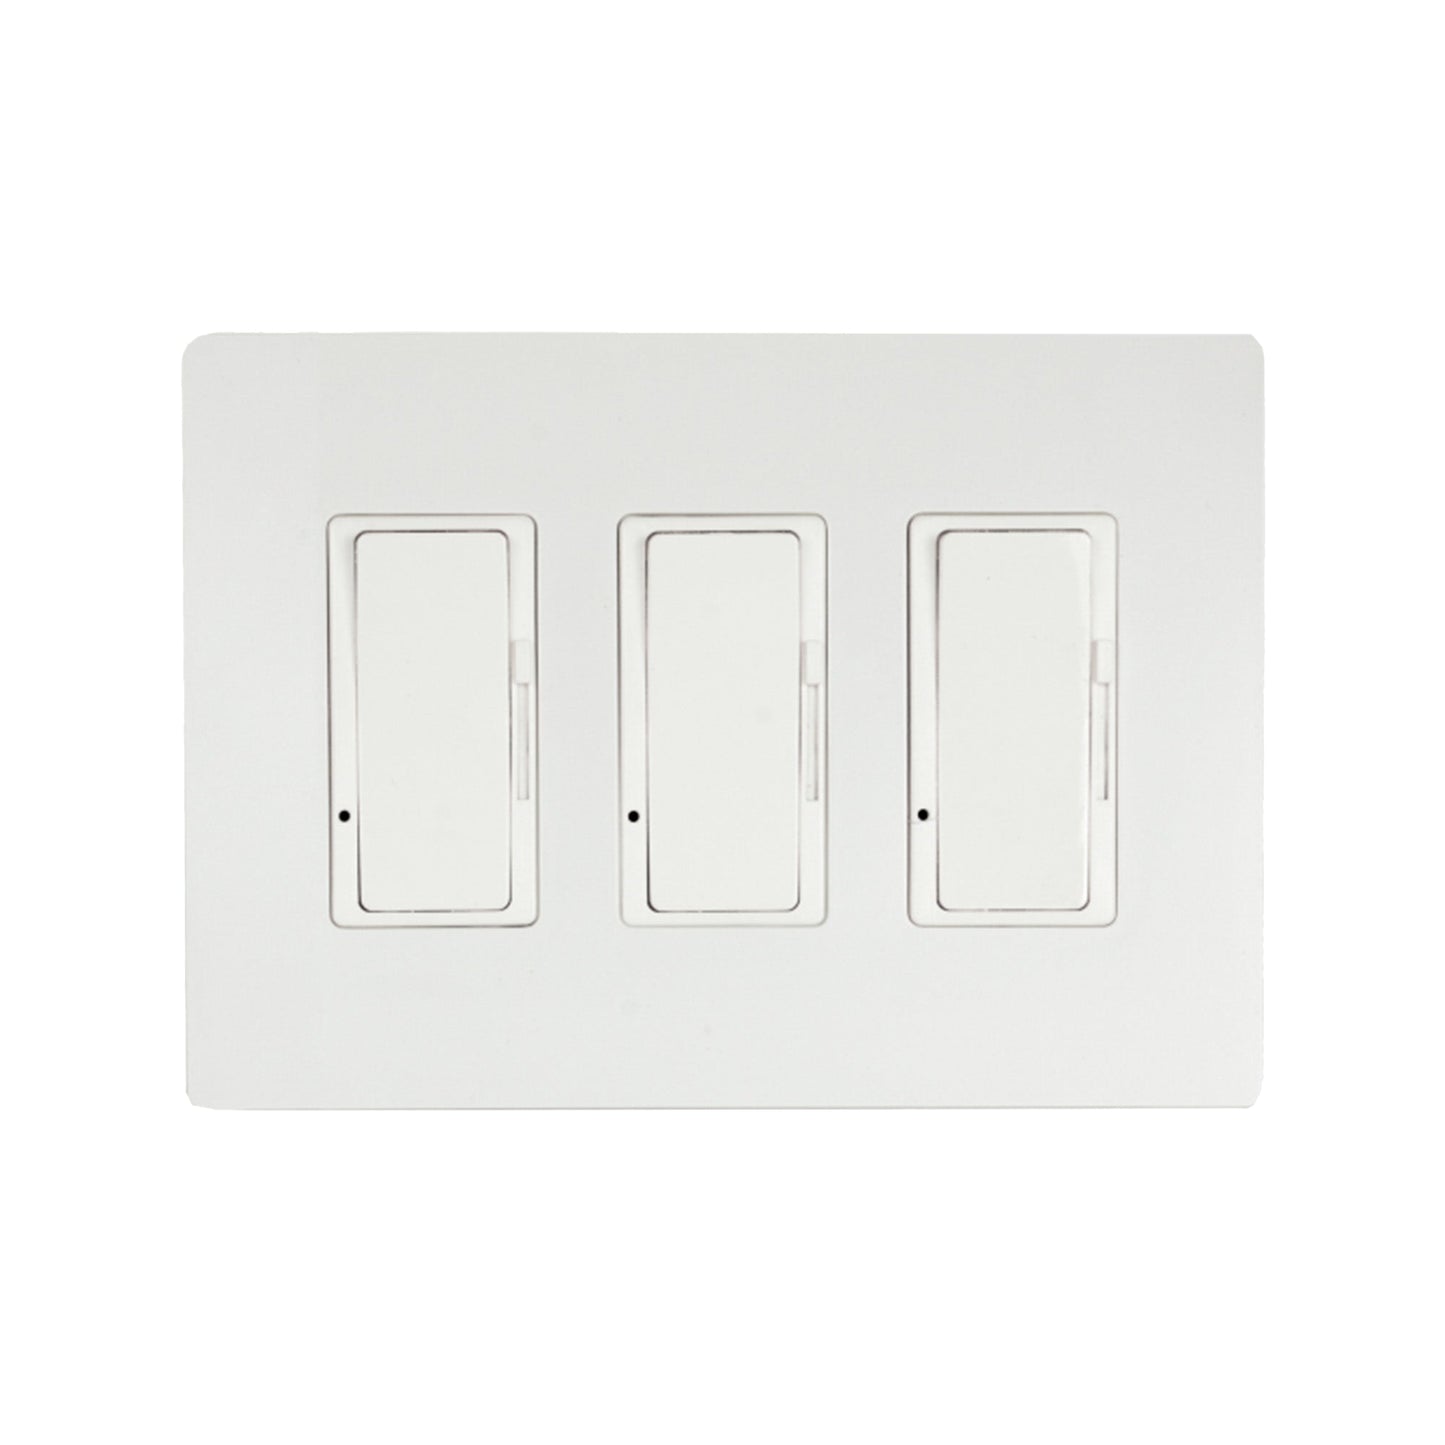 Eurofase Four Dimmer For Universal Relay Control Box with White Screwless